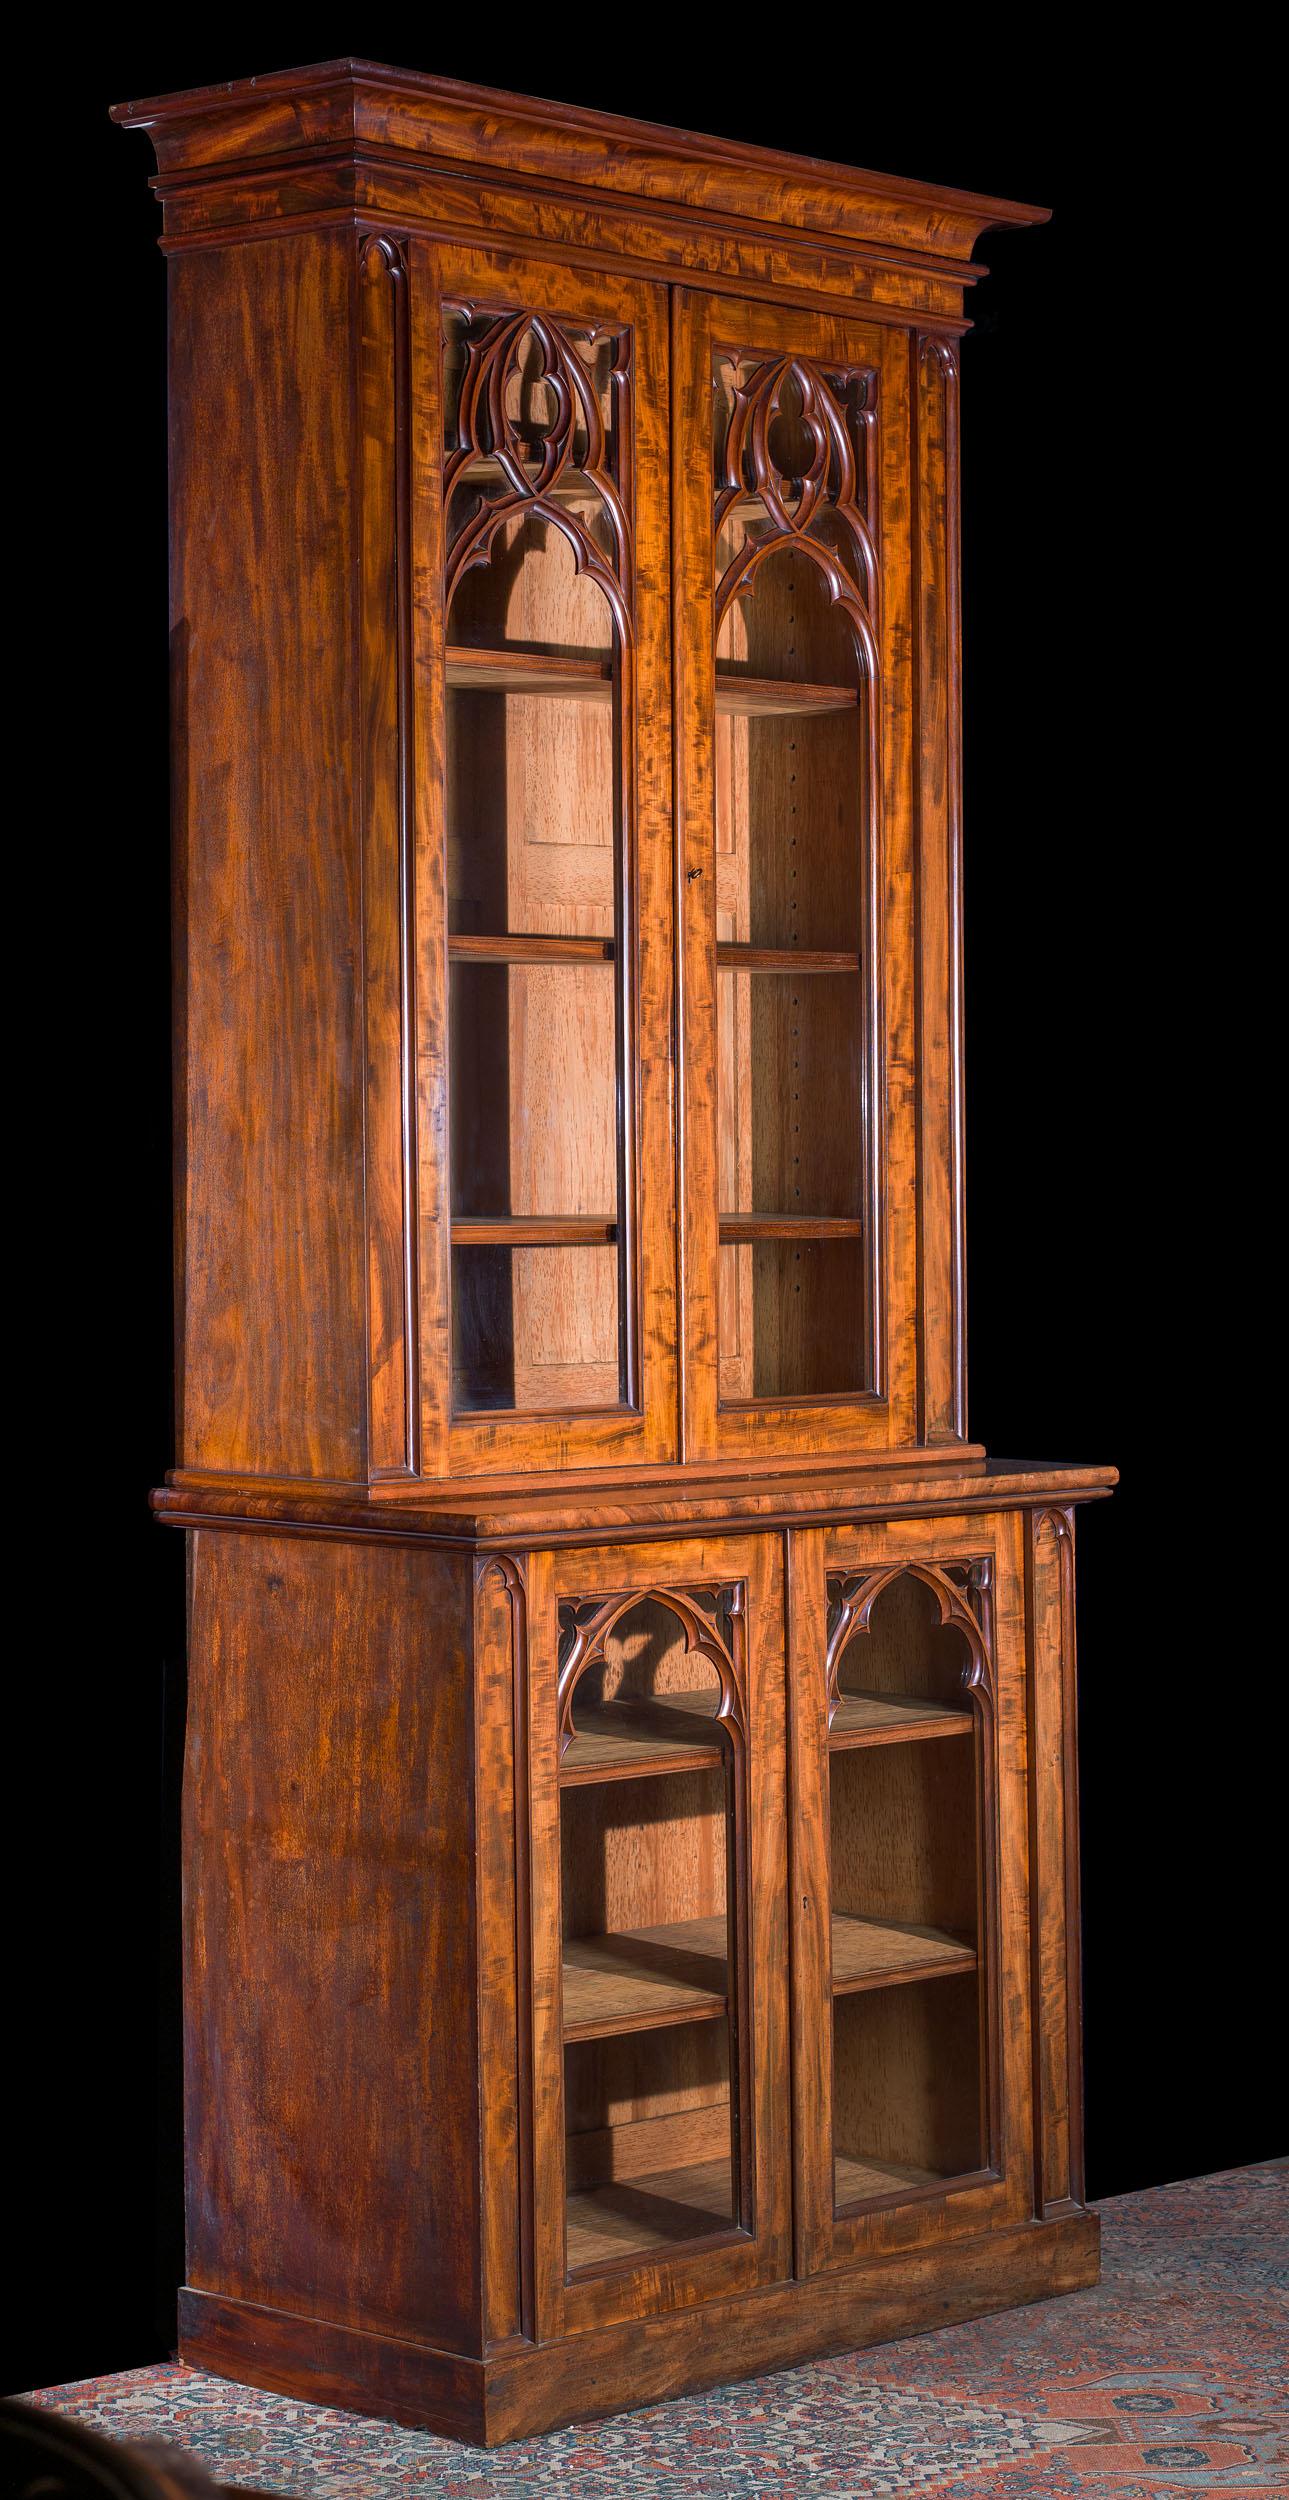 An elegant 19th century Gothic Revival glazed bookcase of small proportions and excellent quality. The figured mahogany case is mounted with two pairs of glazed doors, both carved with fine tracery reminiscent of Gothic windows. Inside the bookcase,